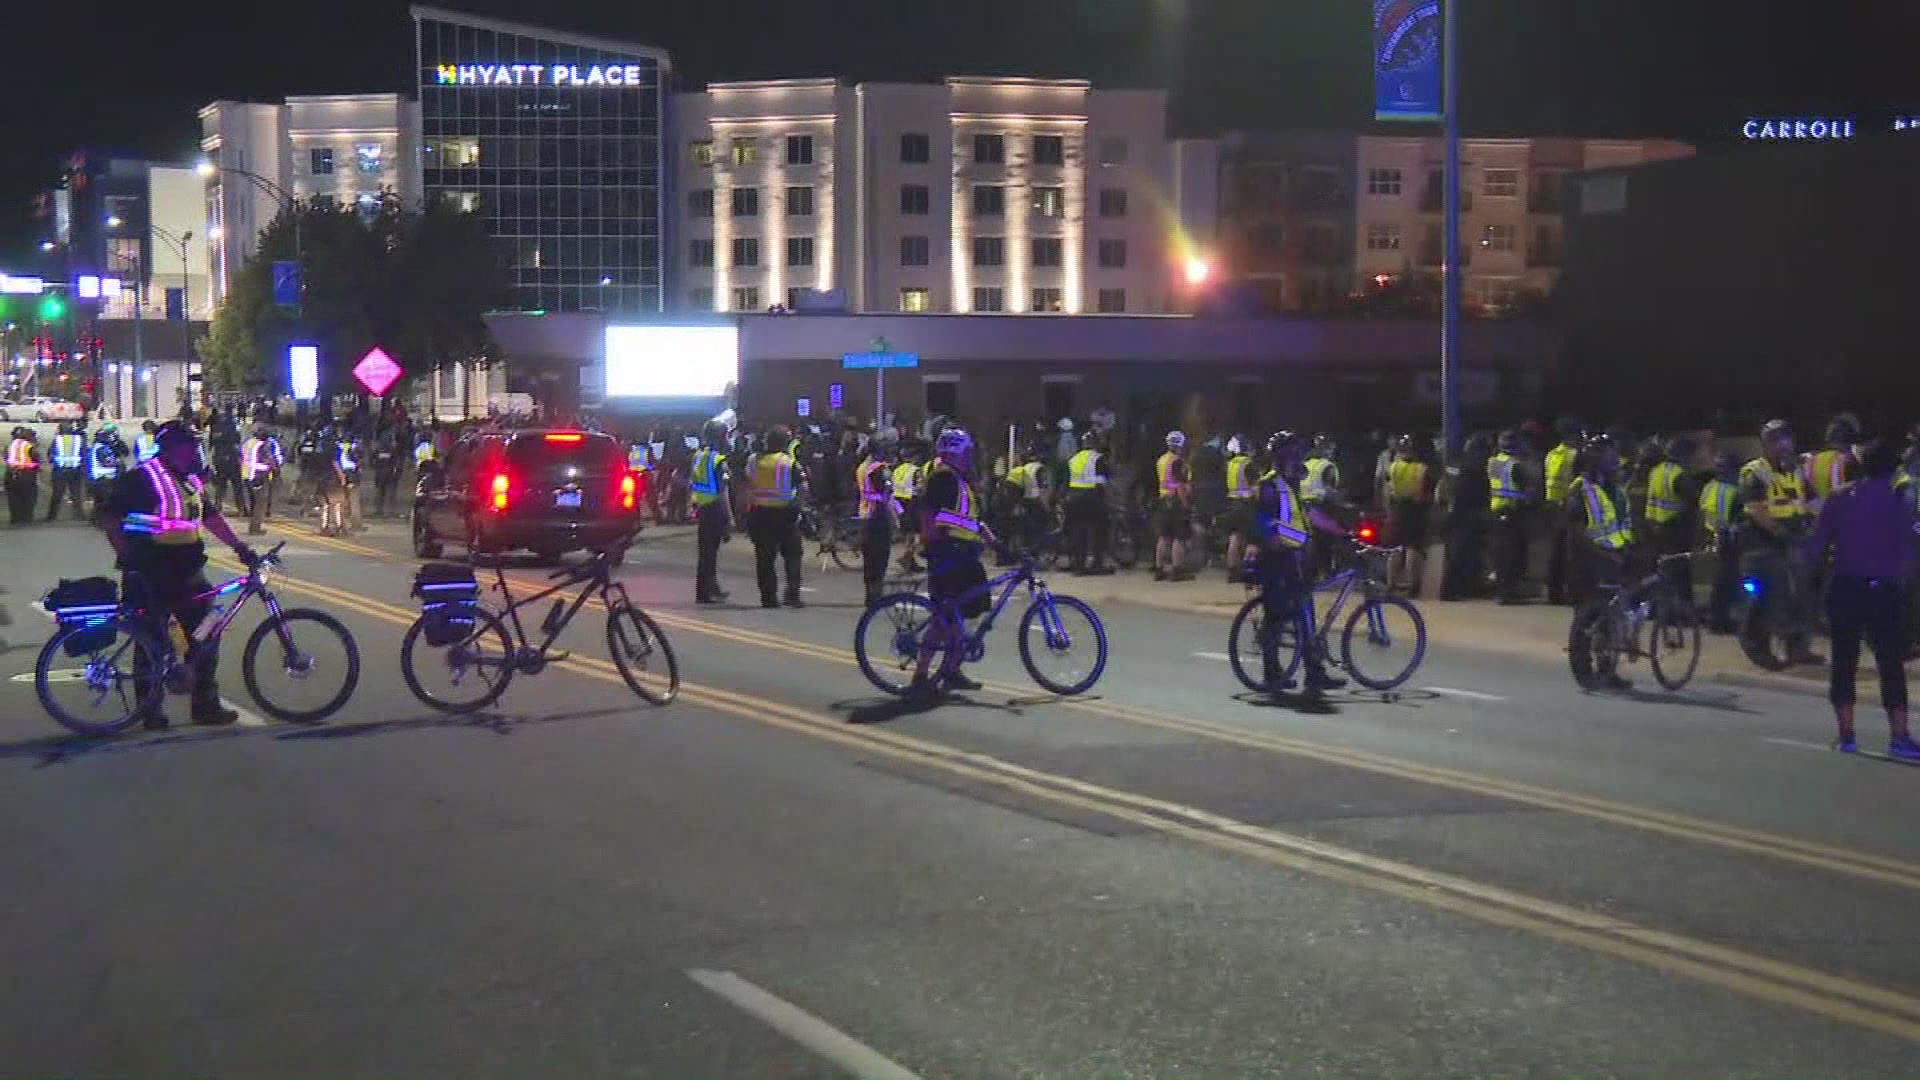 After peaceful protests earlier in the day, fireworks were shot and pepper spray deployed in Downtown Greensboro.